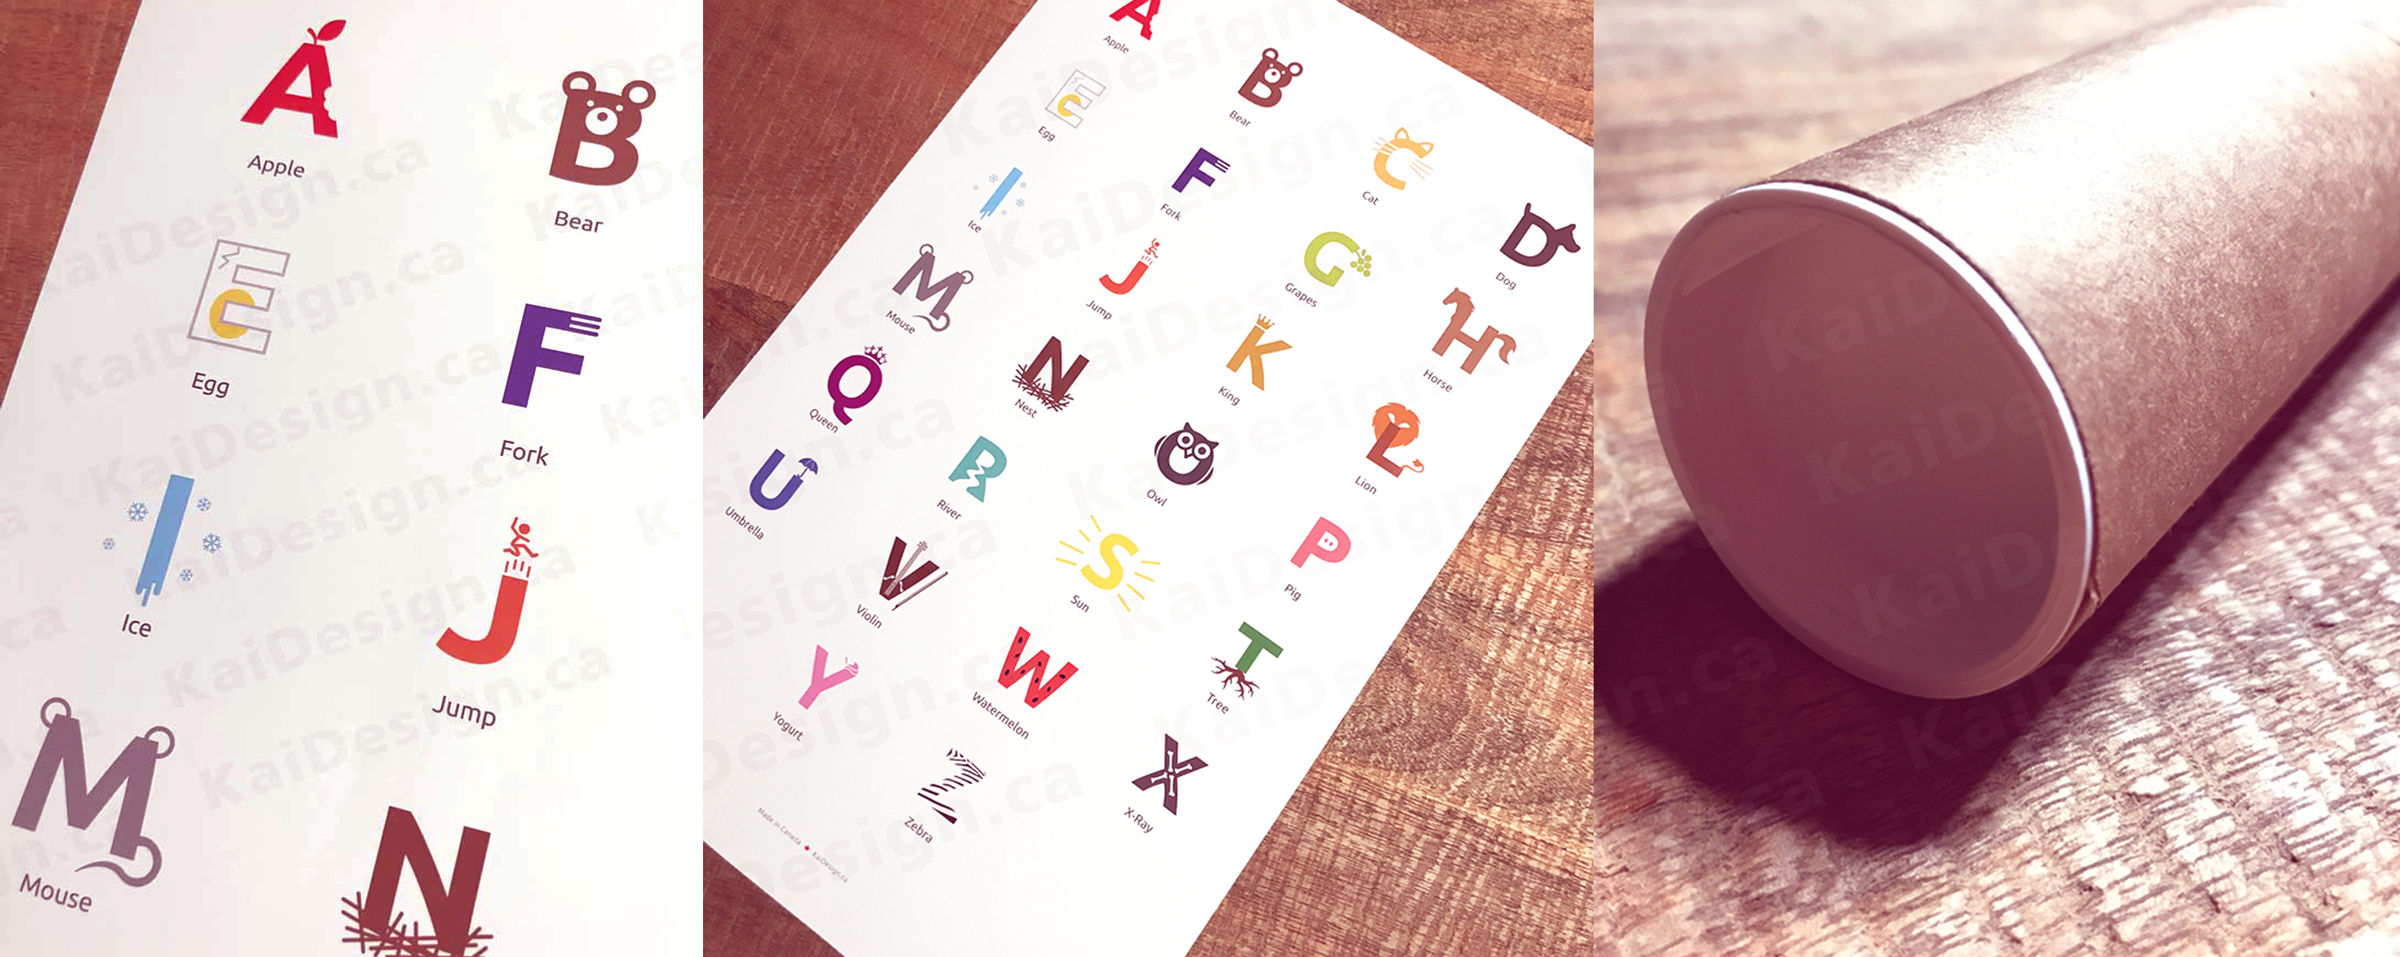 3 images of graphically designed A to Z Poster for children with roll up mailing tube